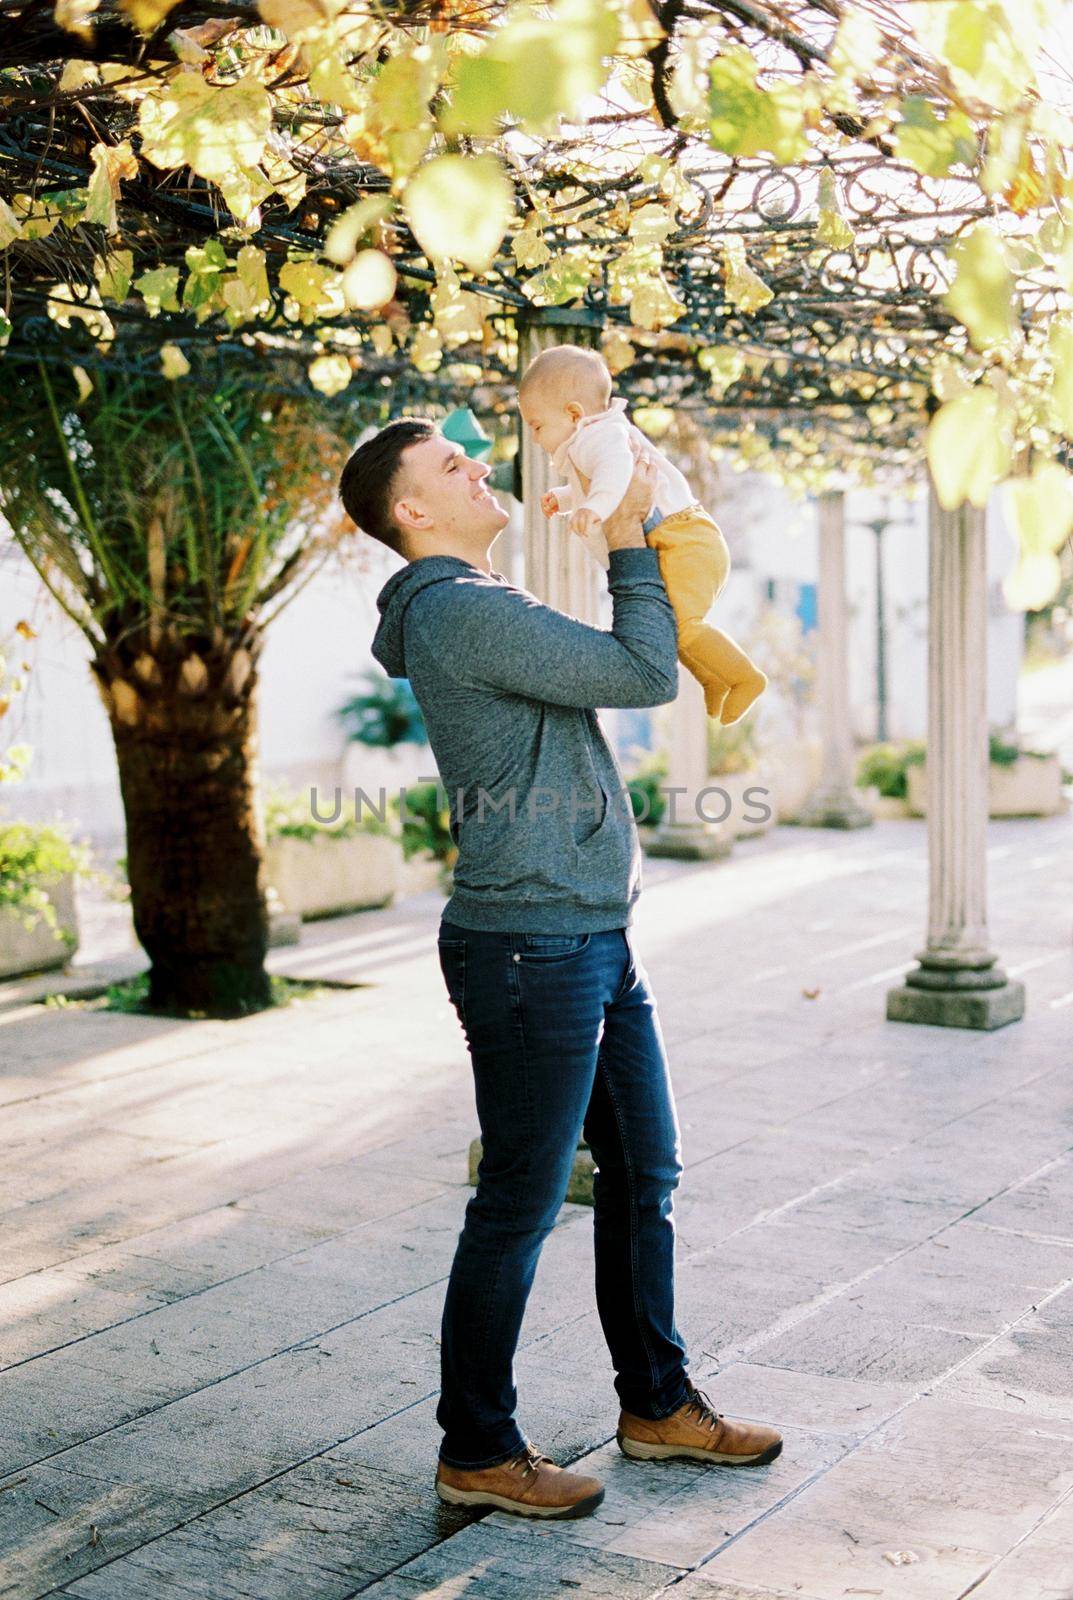 Dad raises a baby in his arms while standing in a pergola under the leaves. High quality photo